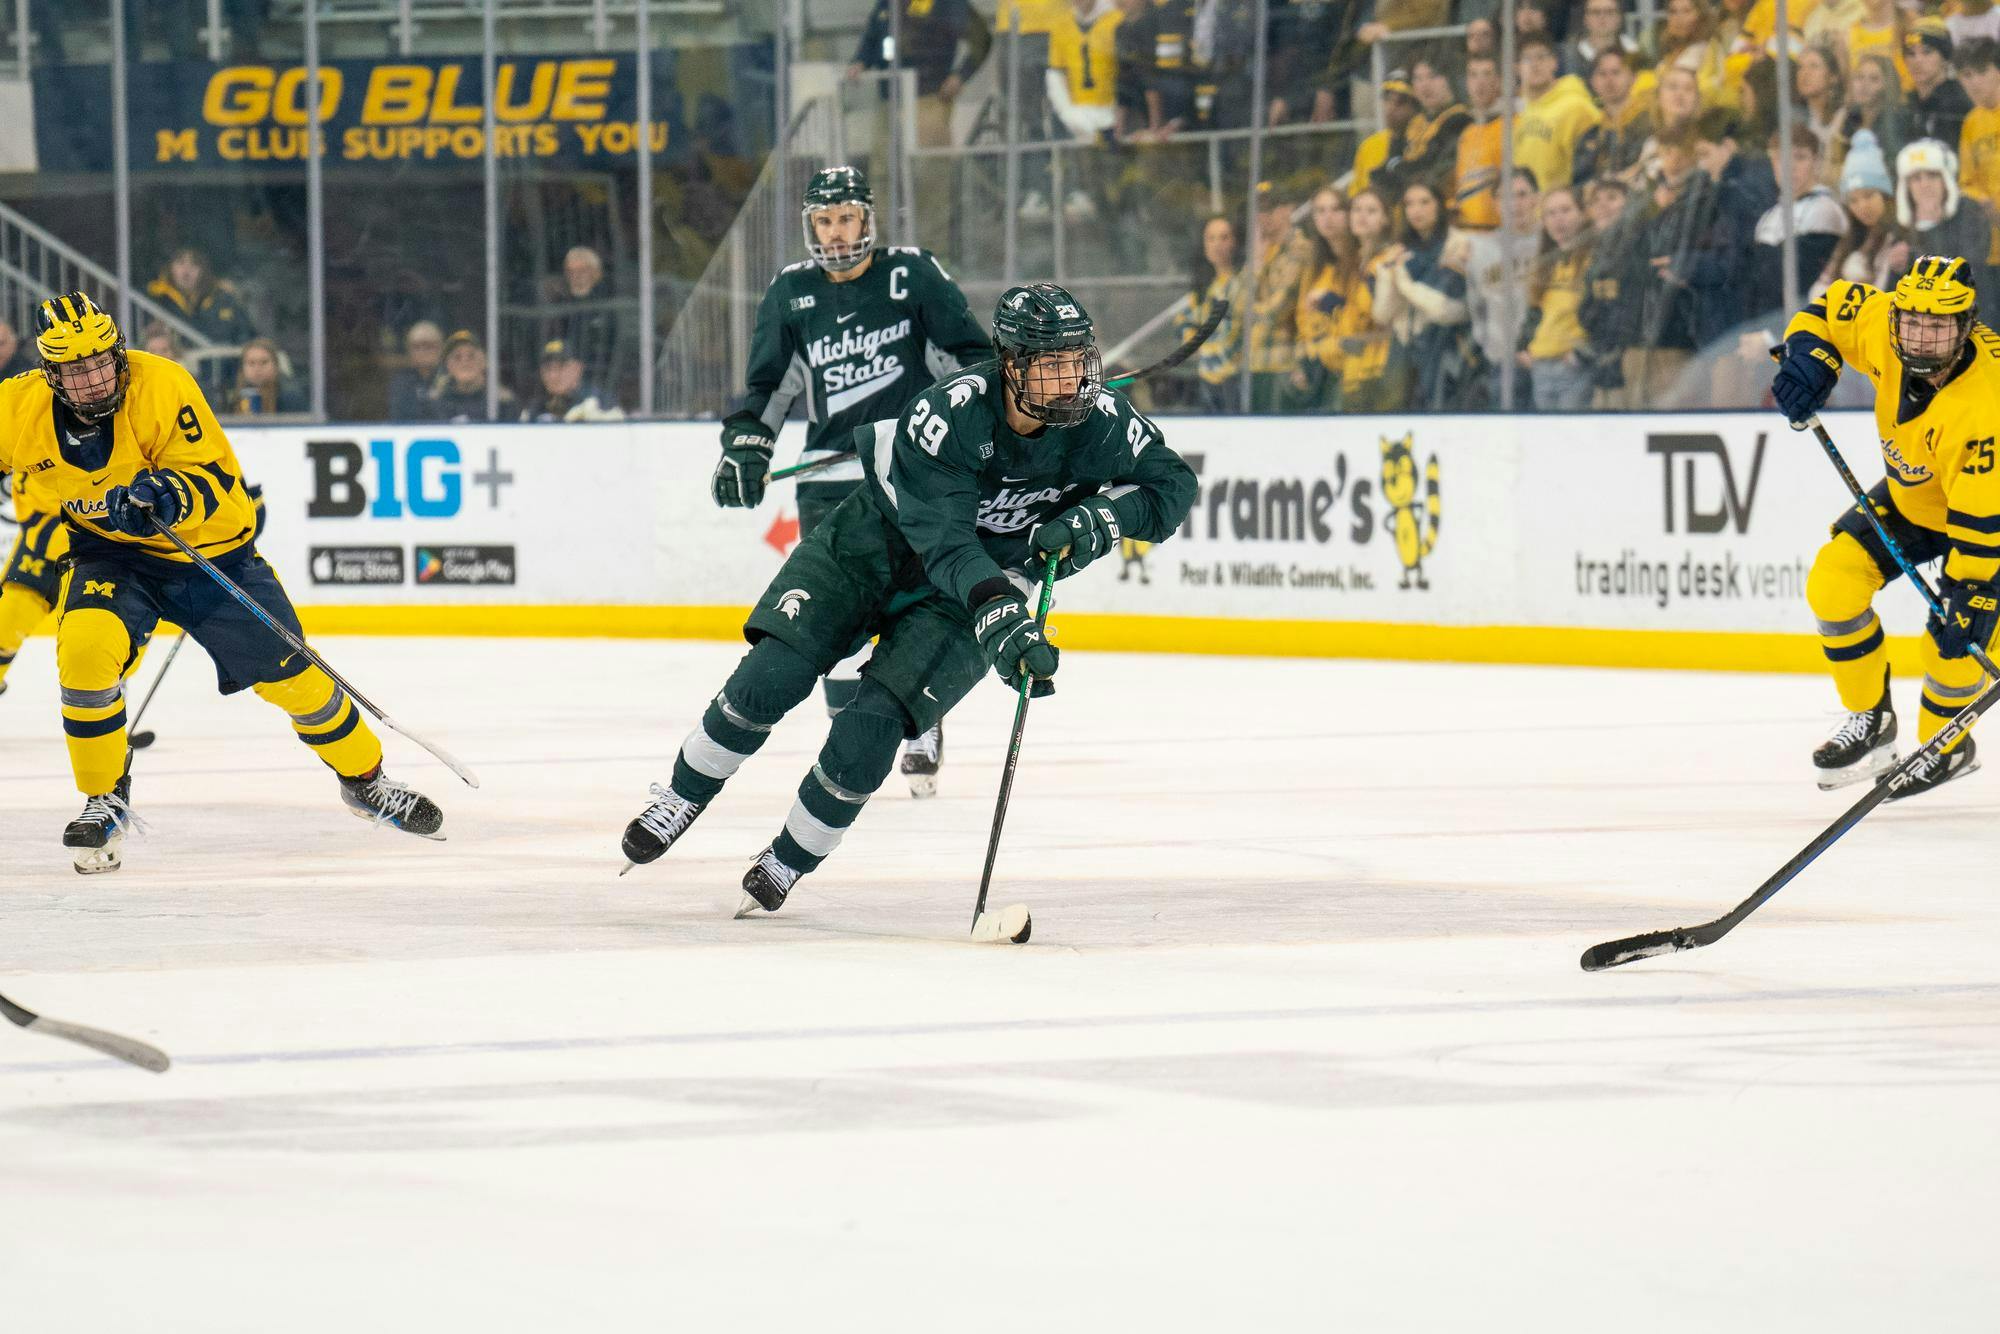 <p>Freshman forward Gavin O'Connell (29) carrying the puck forward during a game against University of Michigan at Yost Ice Arena on Jan. 20, 2024. O’Connell scored one goal in the second period, adding to his tally of 10 goals on the season.</p>